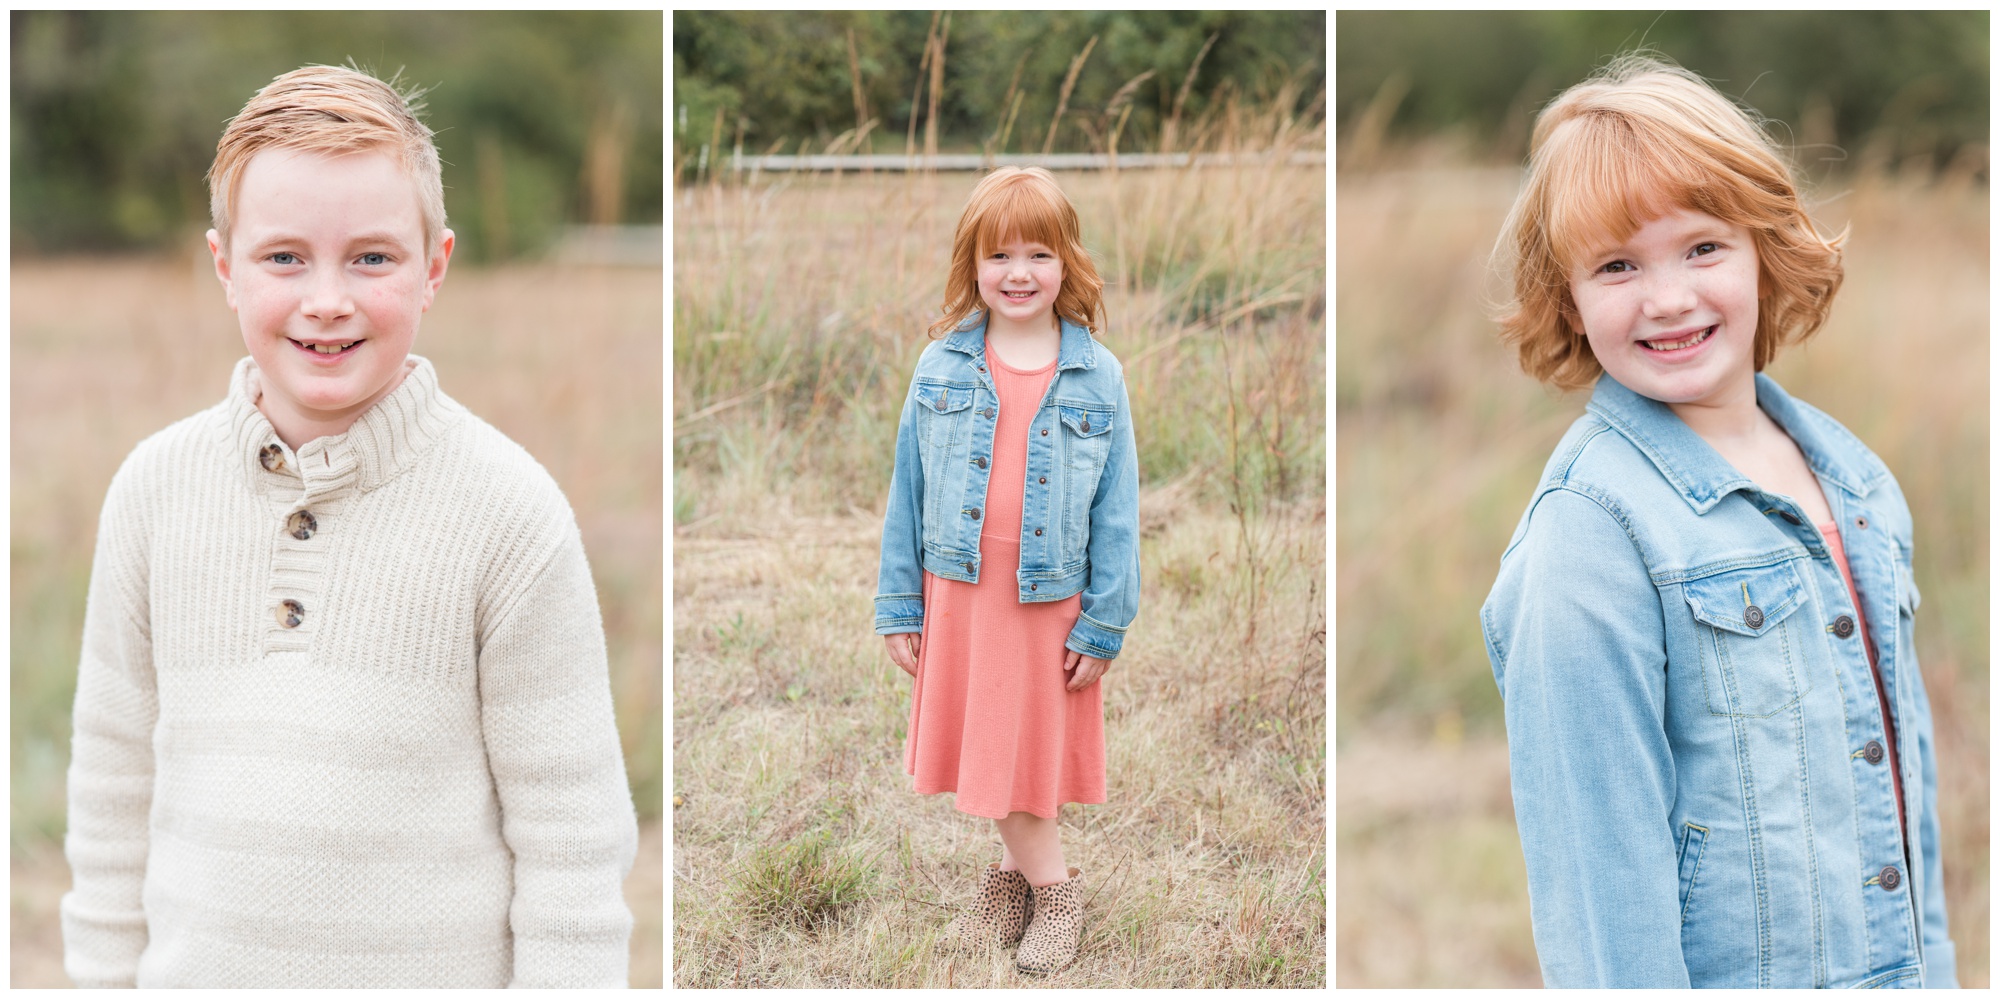 Elmer Oliver Nature Park | Mansfield, Texas | Mansfield Family Session | Fort Worth Family Photographer | Lauren Grimes Photography